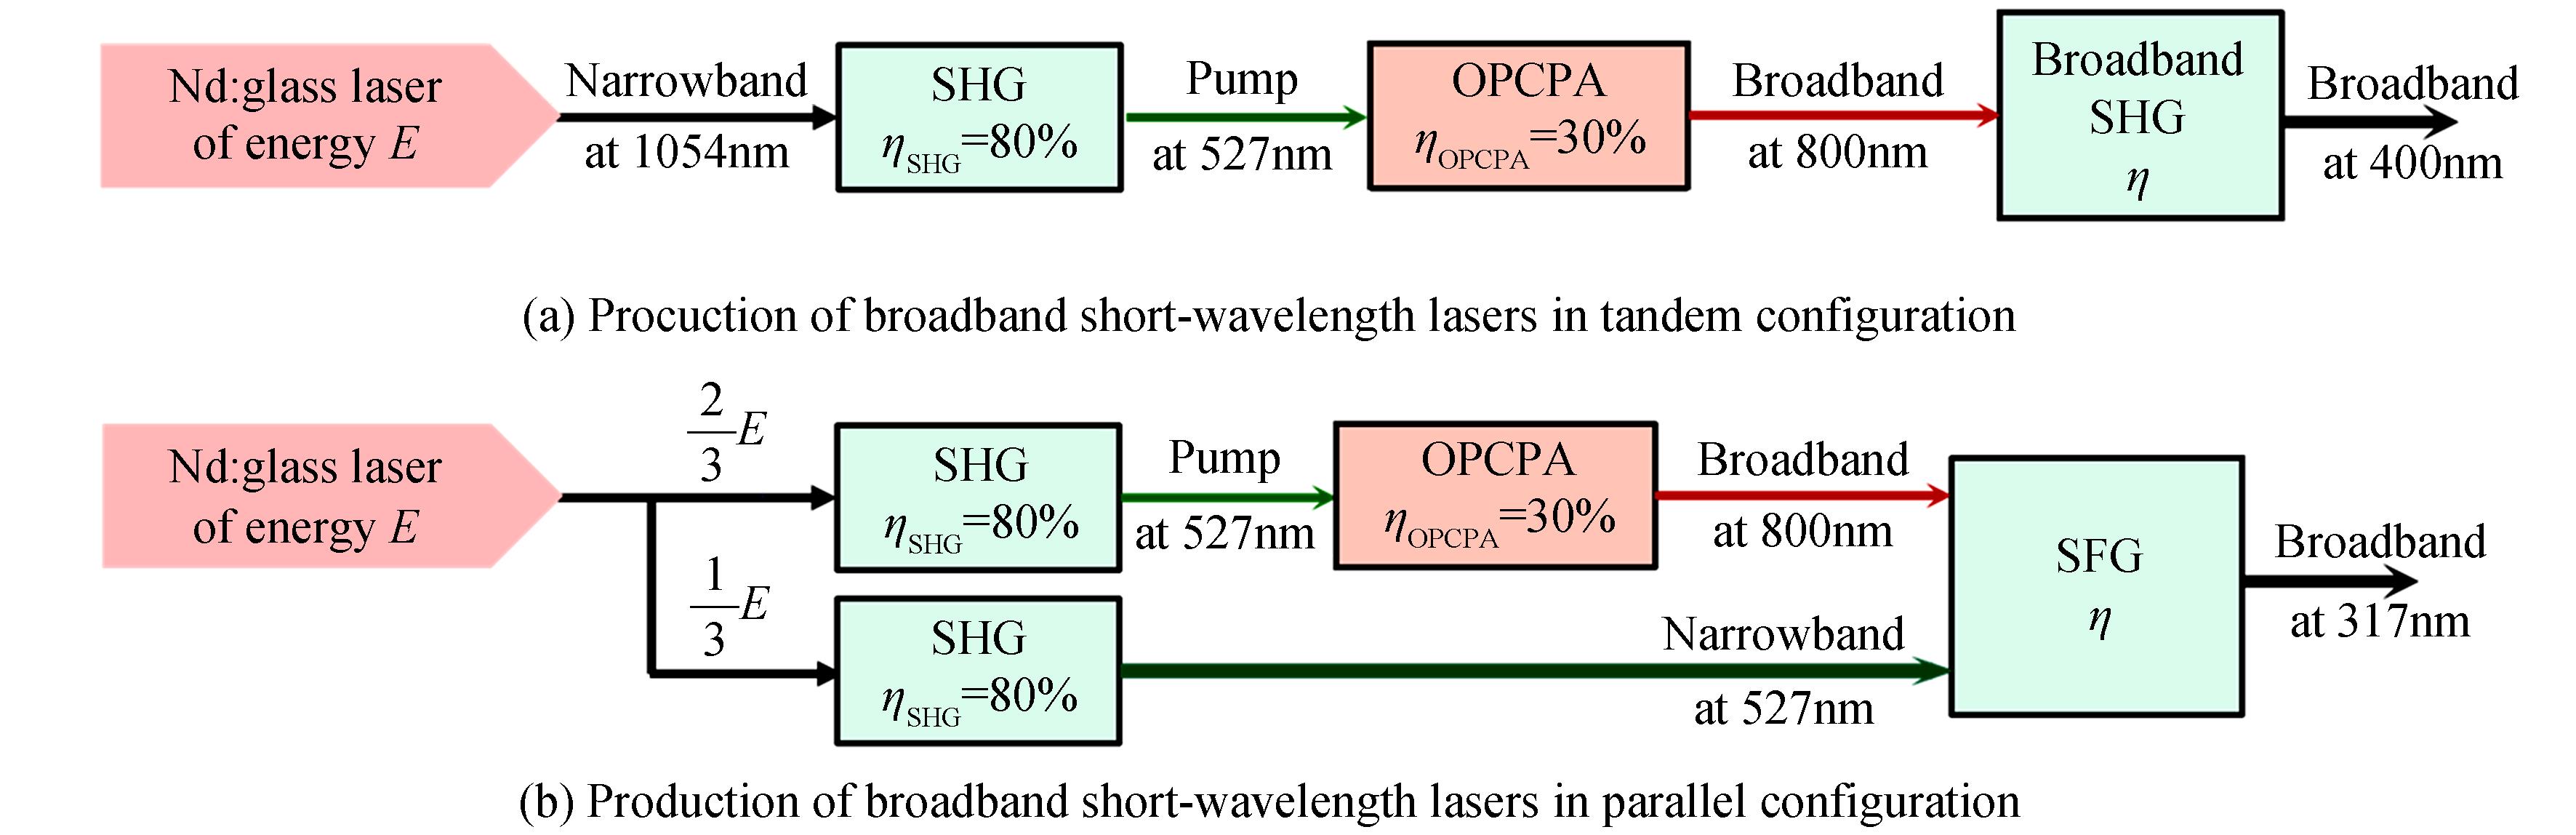 Comparison on two schemes for the production of broadband short-wavelength lasers